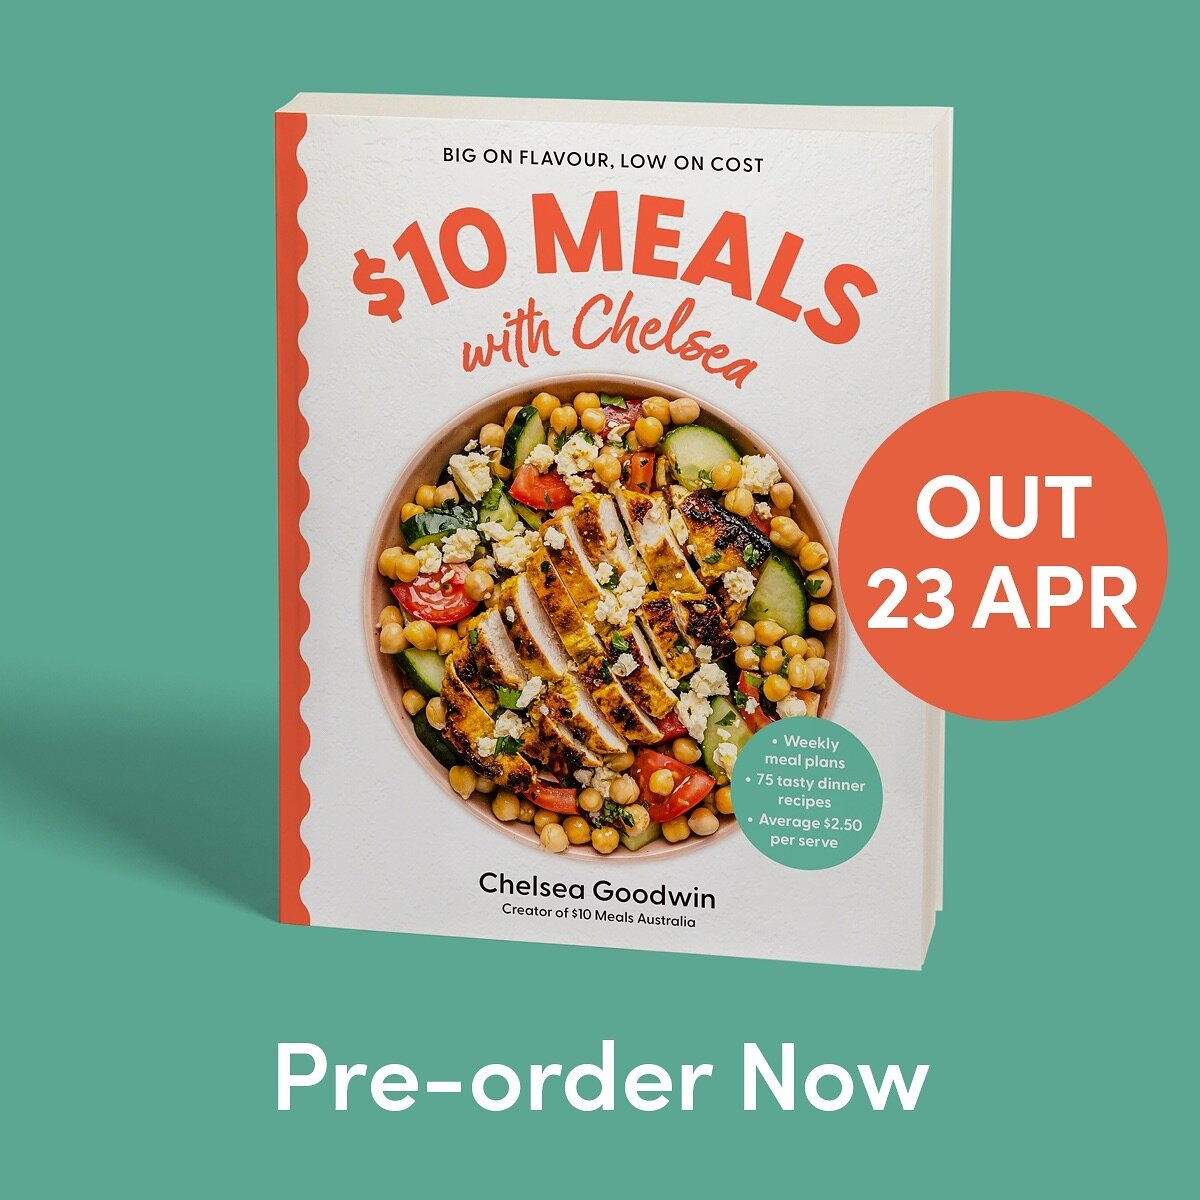 Here it is! My very first cookbook: $10 Meals with Chelsea✨✨✨

This is truly a dream come true for me, thanks to the wonderful team at @penguinbooksaus 🥹

I&rsquo;ve developed 10 weeks of budget dinner meal plans with recipes and grocery lists to he